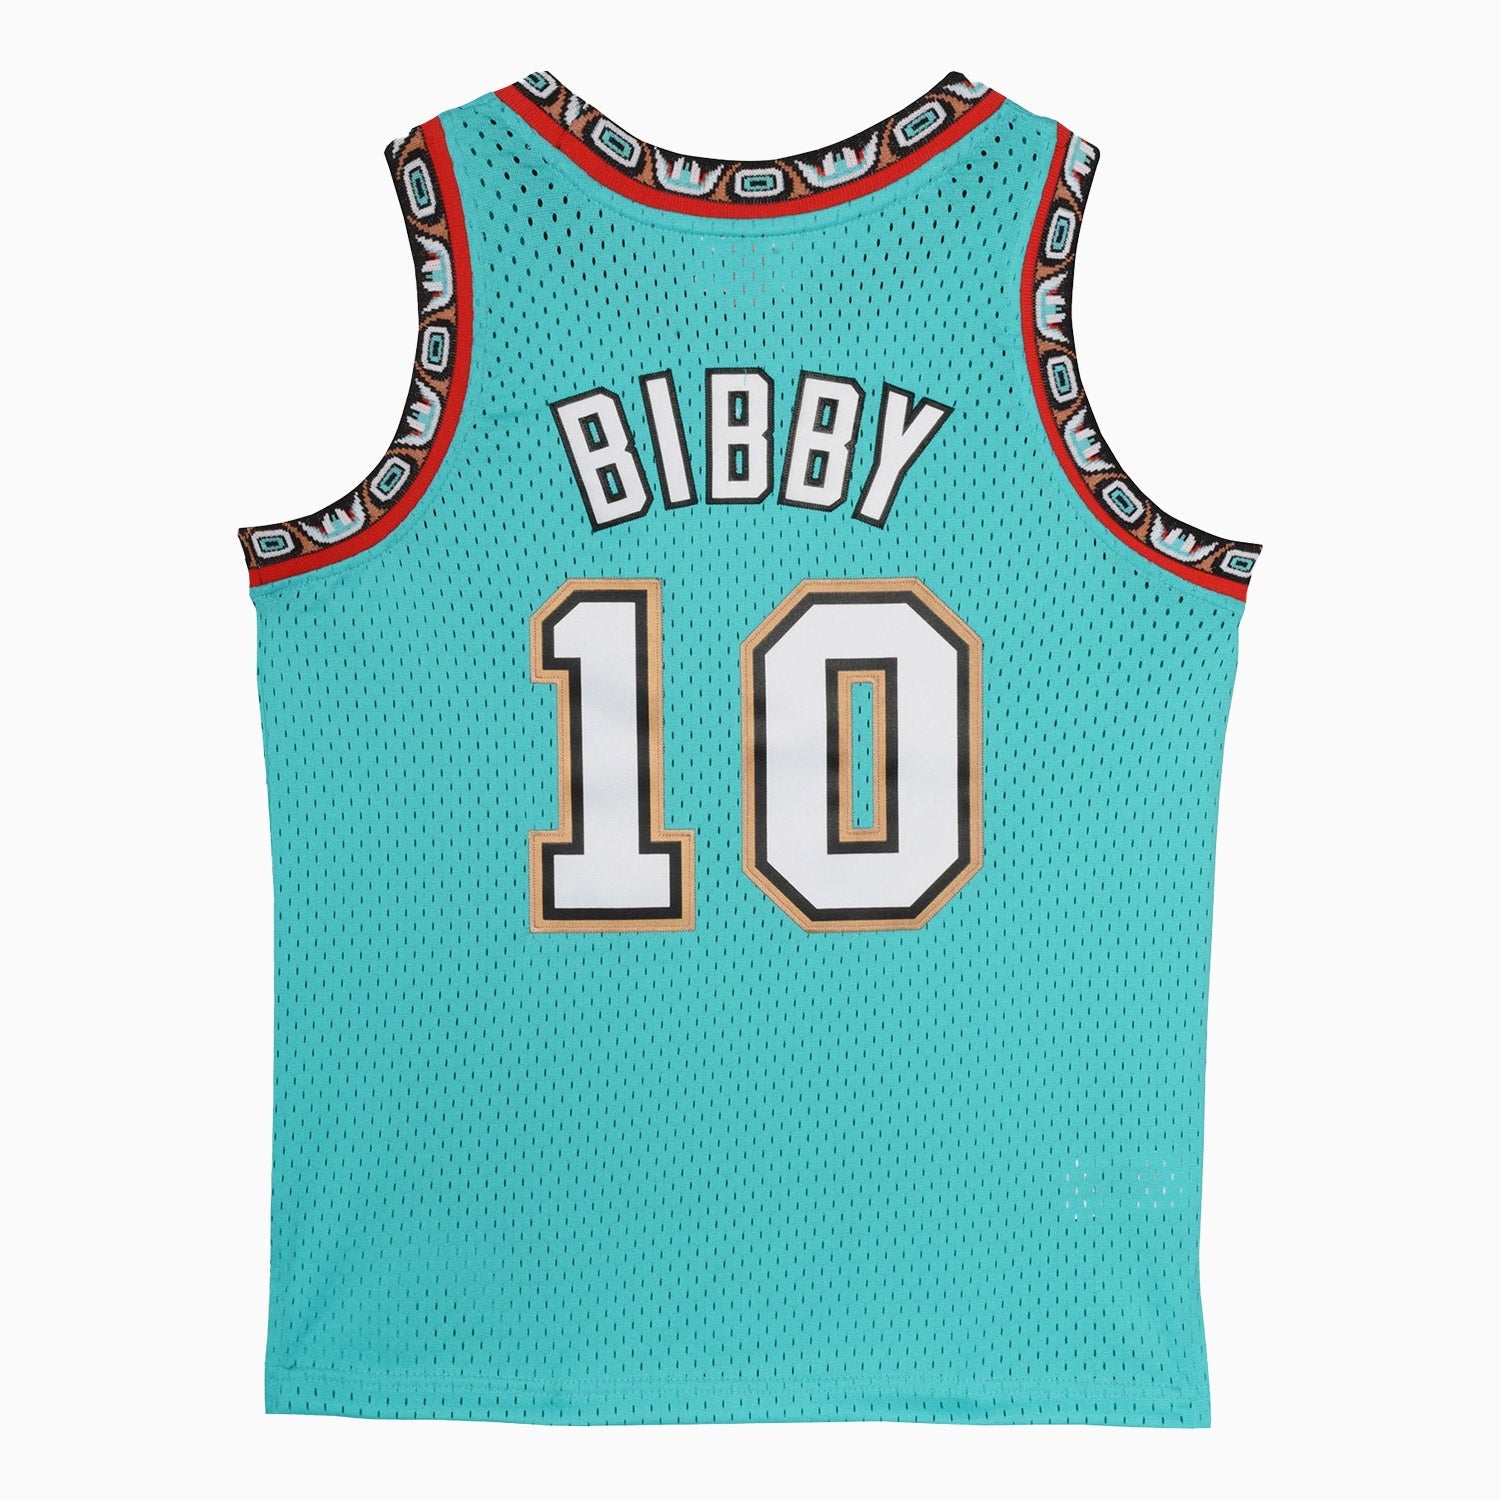 mitchell-ness-swingman-mike-bibby-vancouver-grizzlies-nba-jersey-toddlers-9n2t1brd0-vgzmb-y98